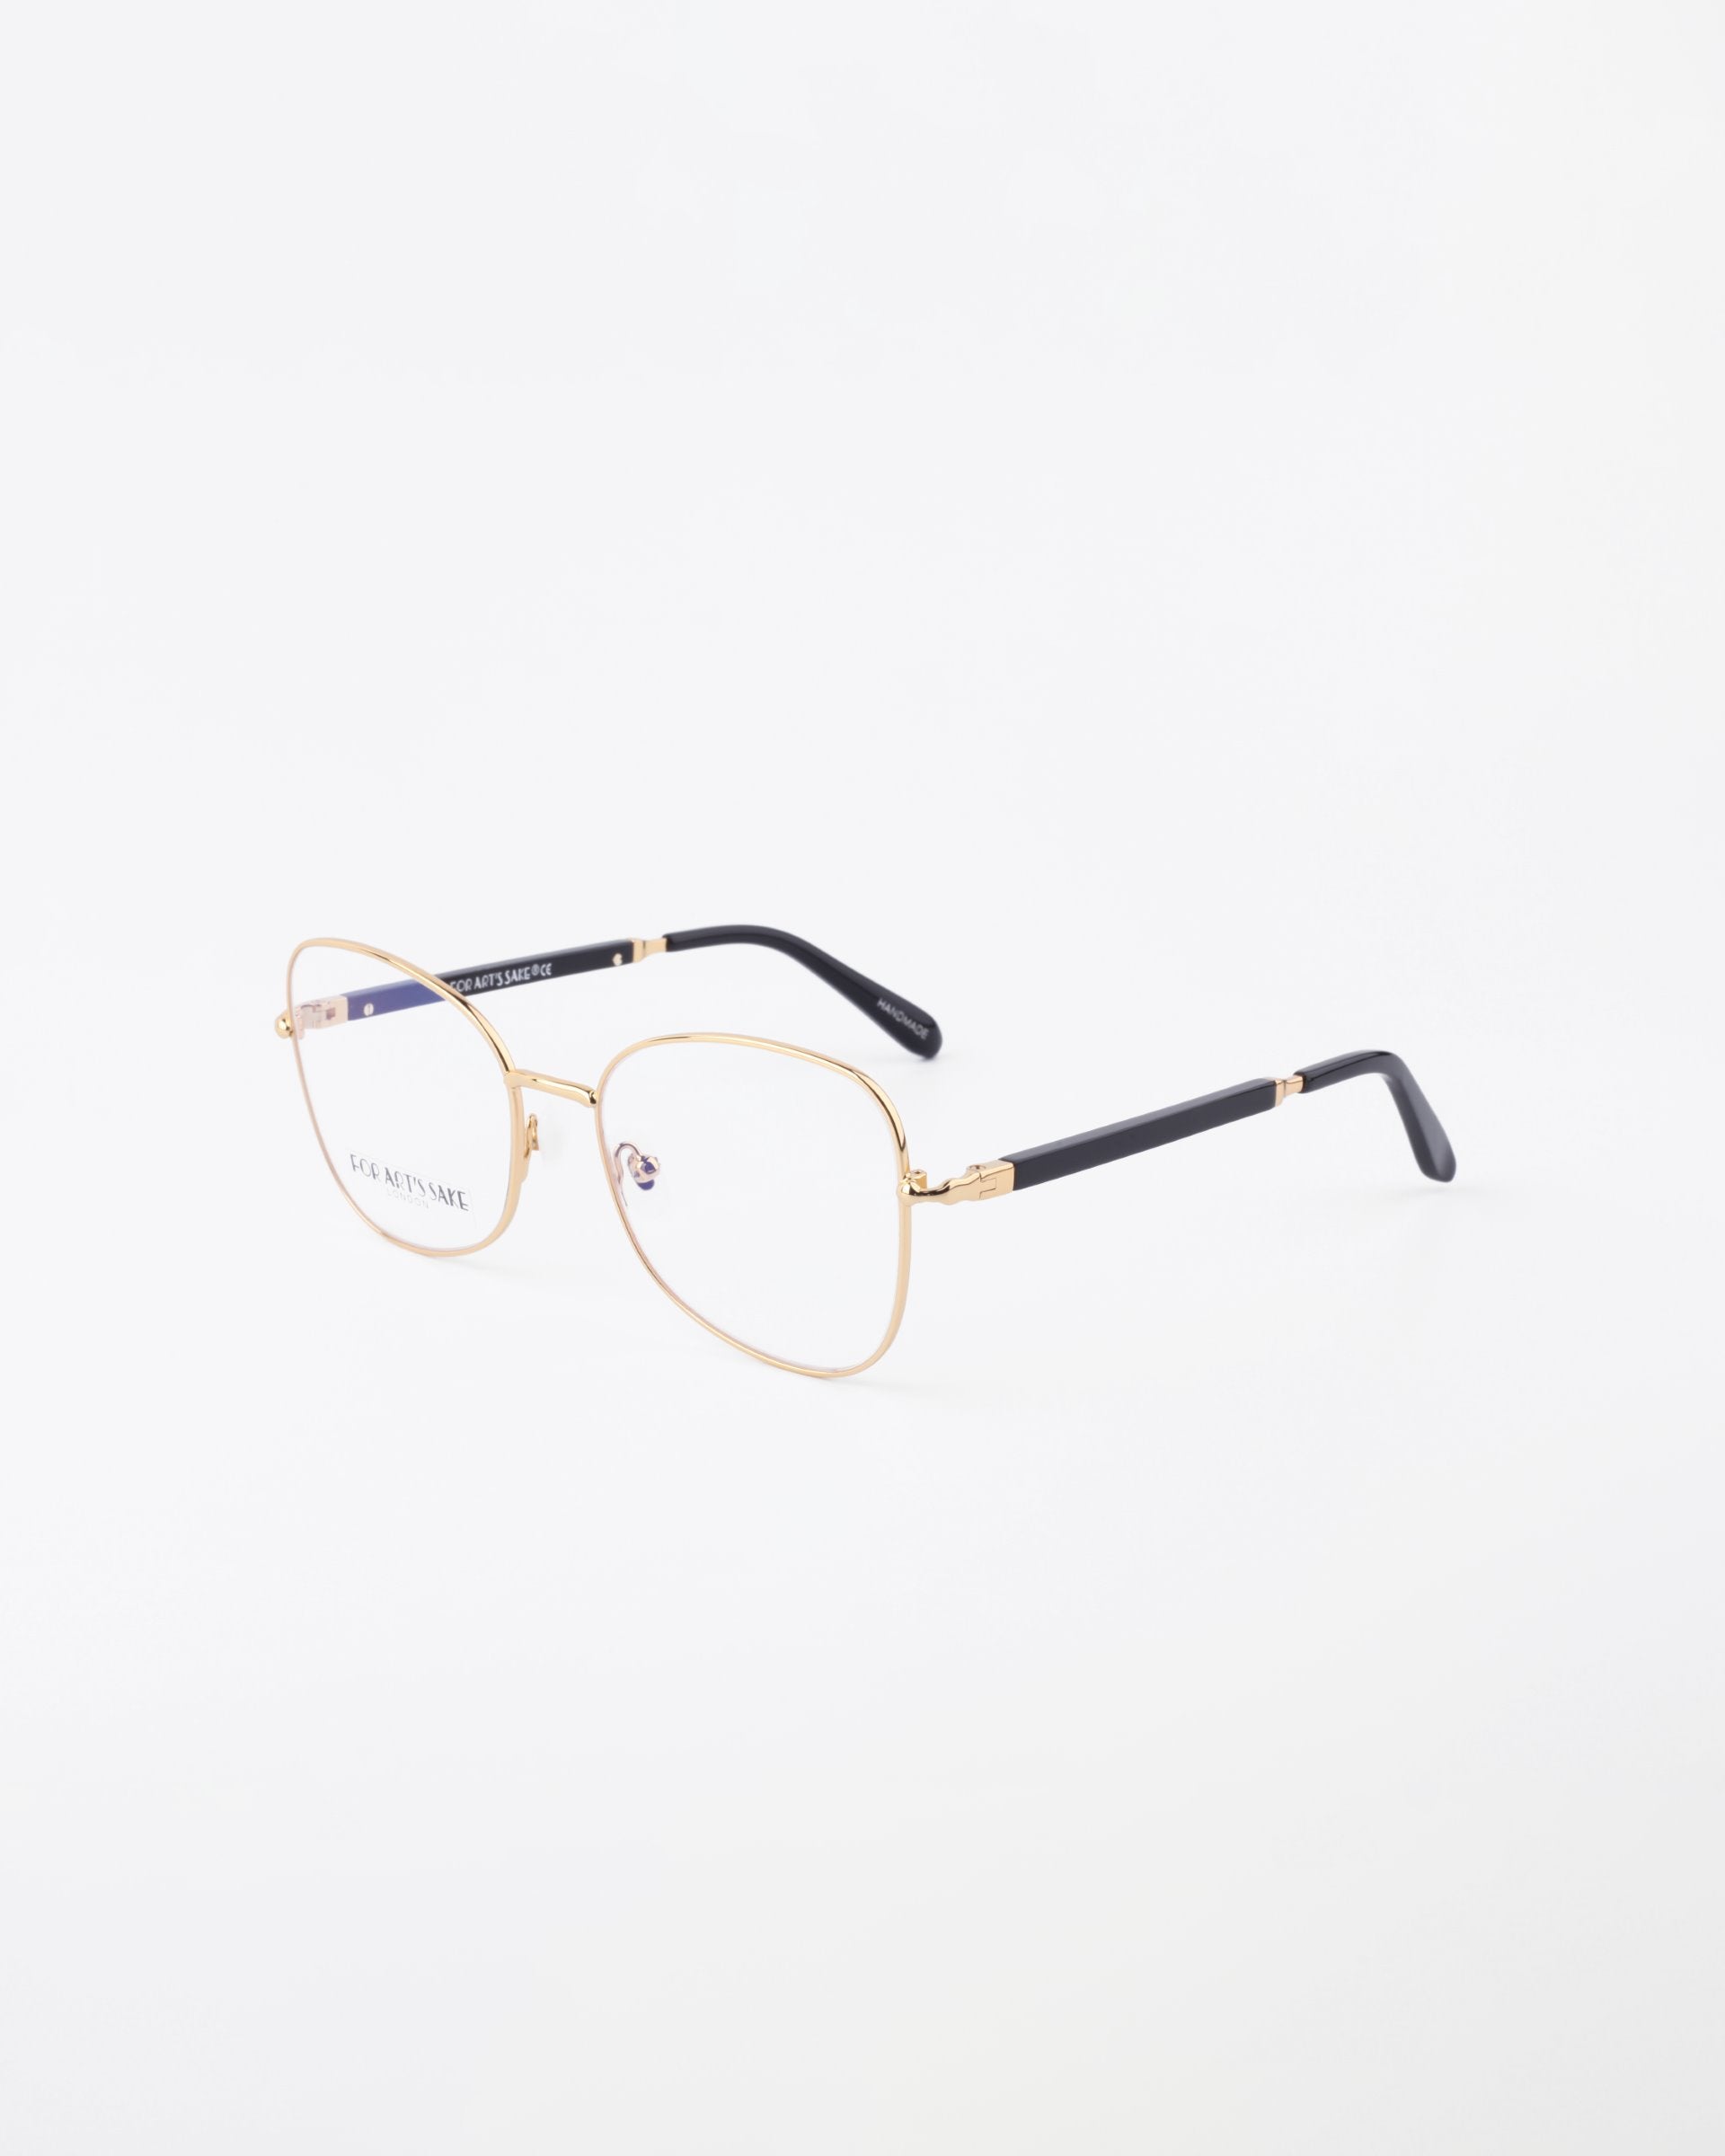 A pair of thin, 18-karat gold-plated eyeglasses displayed on a white background. The Grace glasses from For Art's Sake® have square lenses with black temple tips and small nose pads attached to the bridge for added comfort. One of the side arms is partially visible, showcasing a sleek black and gold design.